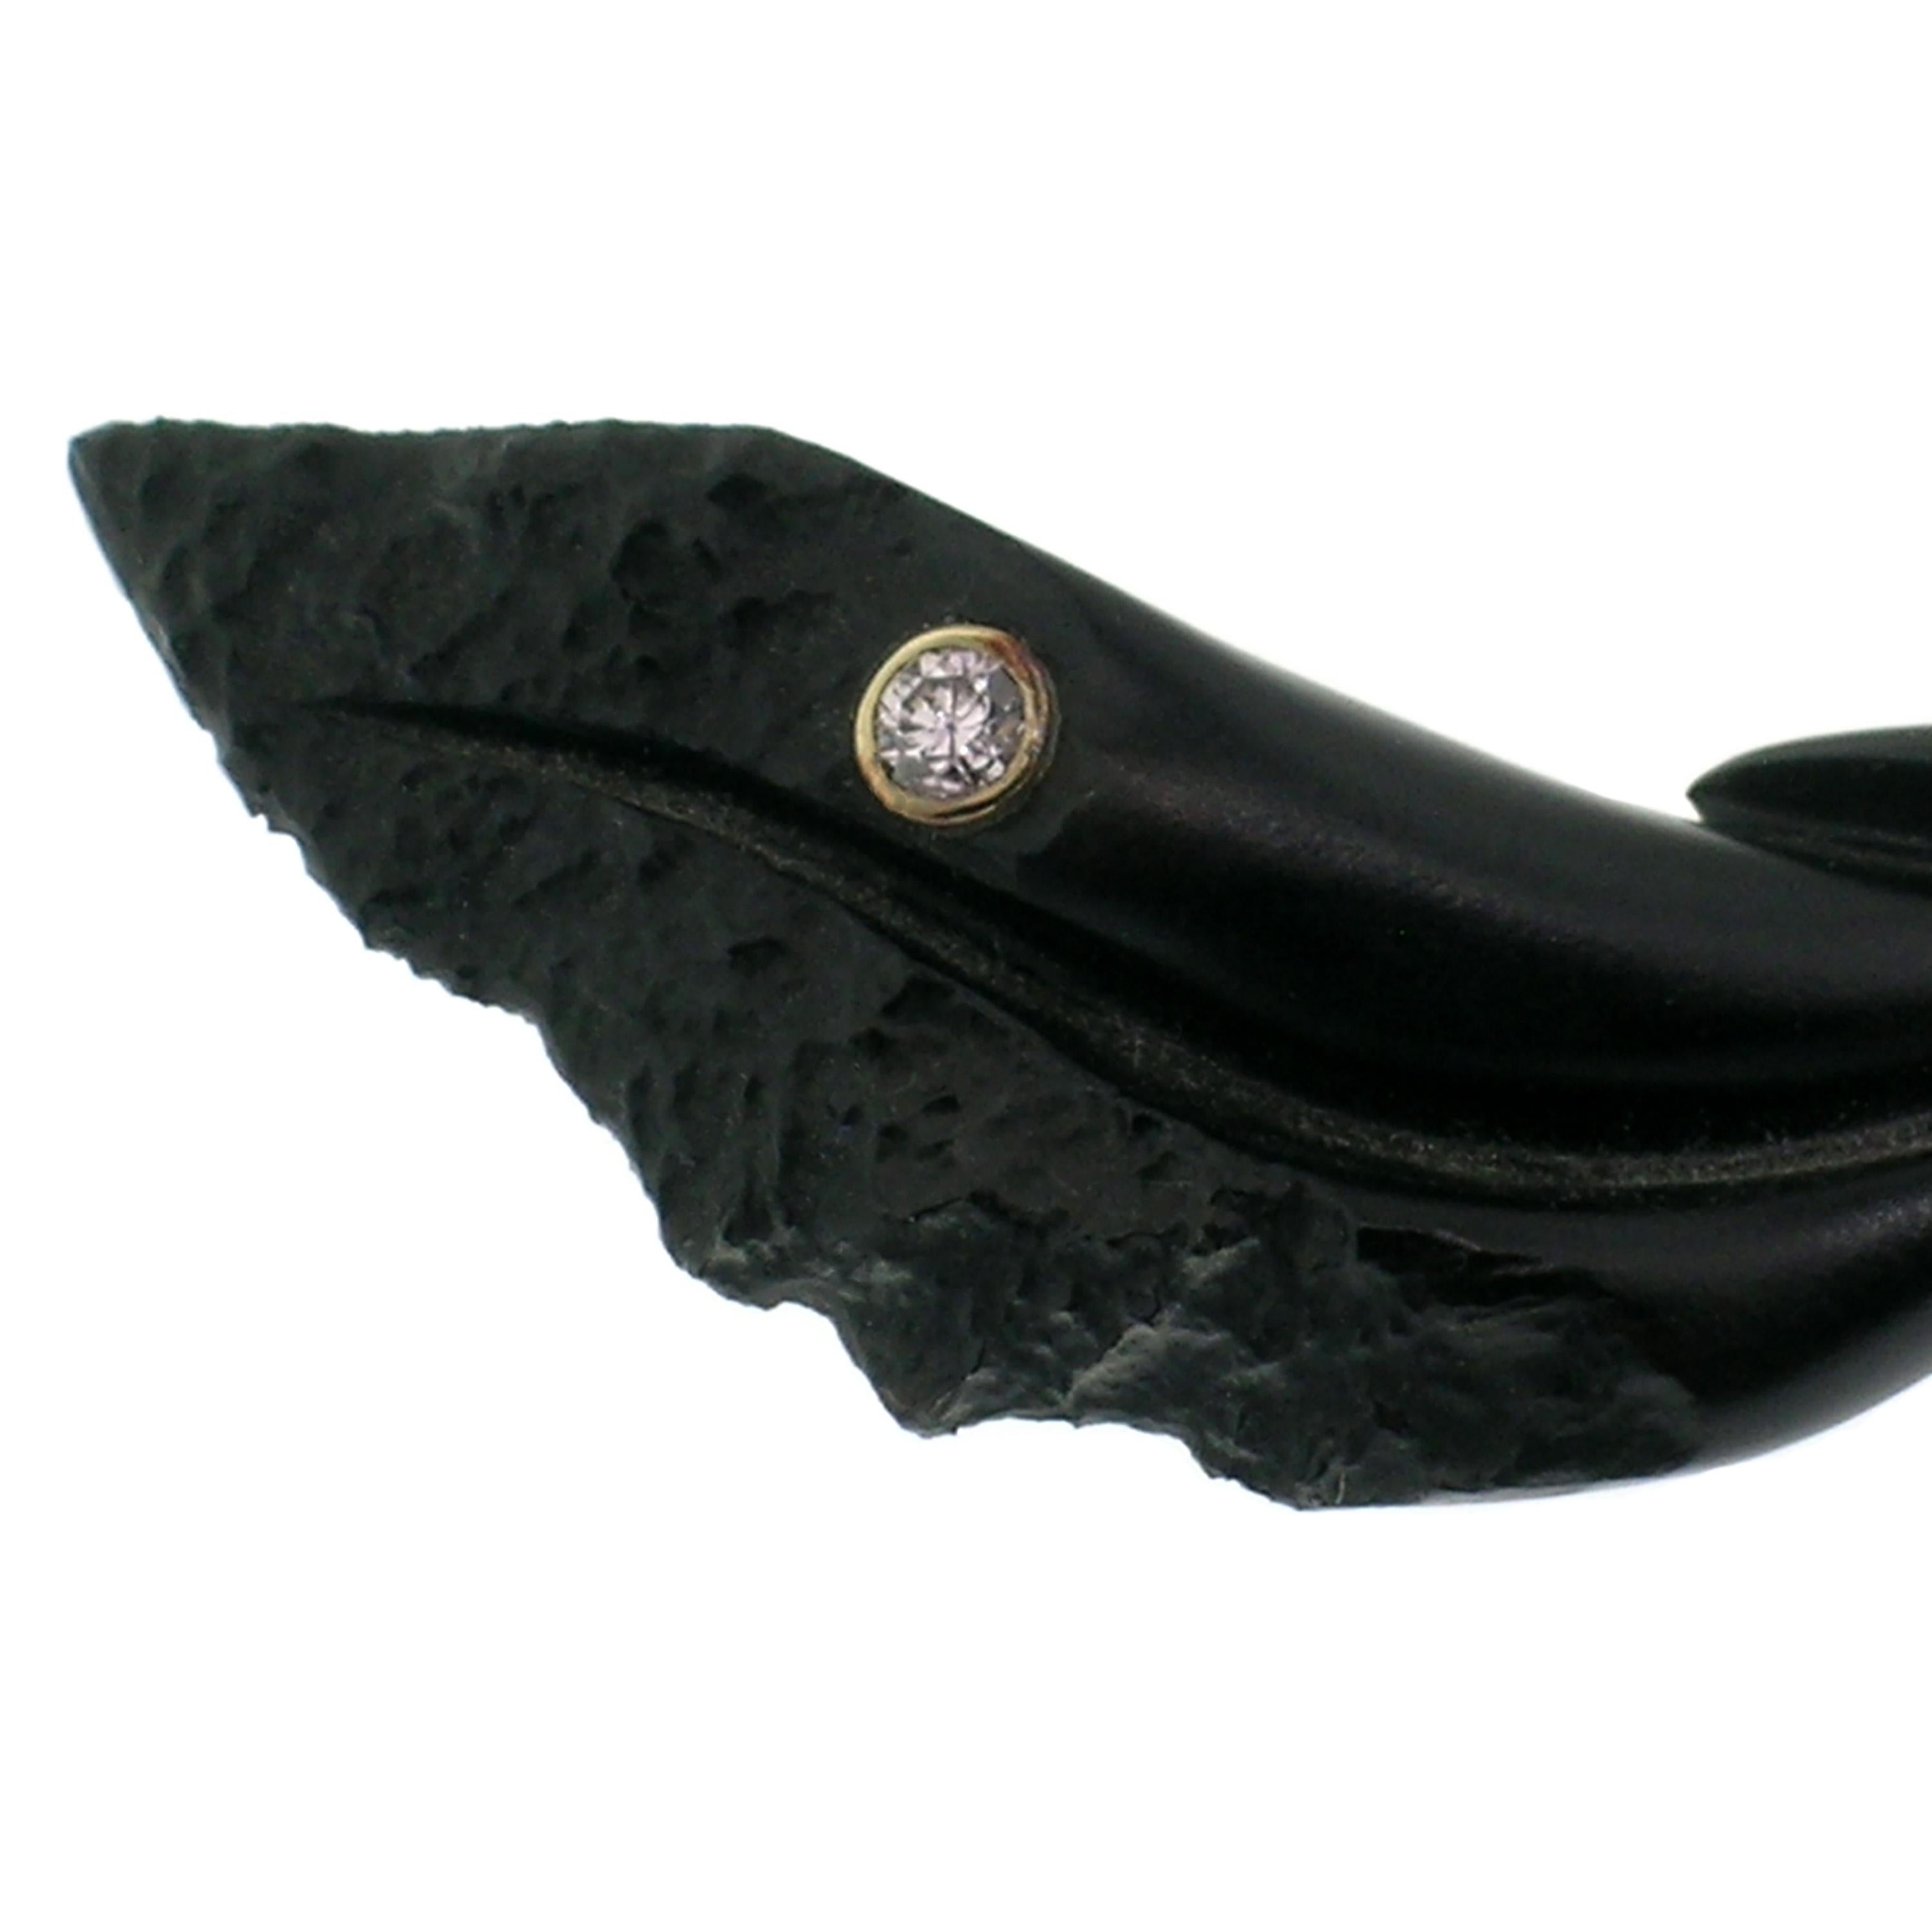 This natural black chalcedony sculpture, carved by renowned American lapidary master Steve Walters, features elegant carving contrasted with a rough stone texture. The sinuous sculpture is set with an exceptional cabochon of Oregon Sunstone which